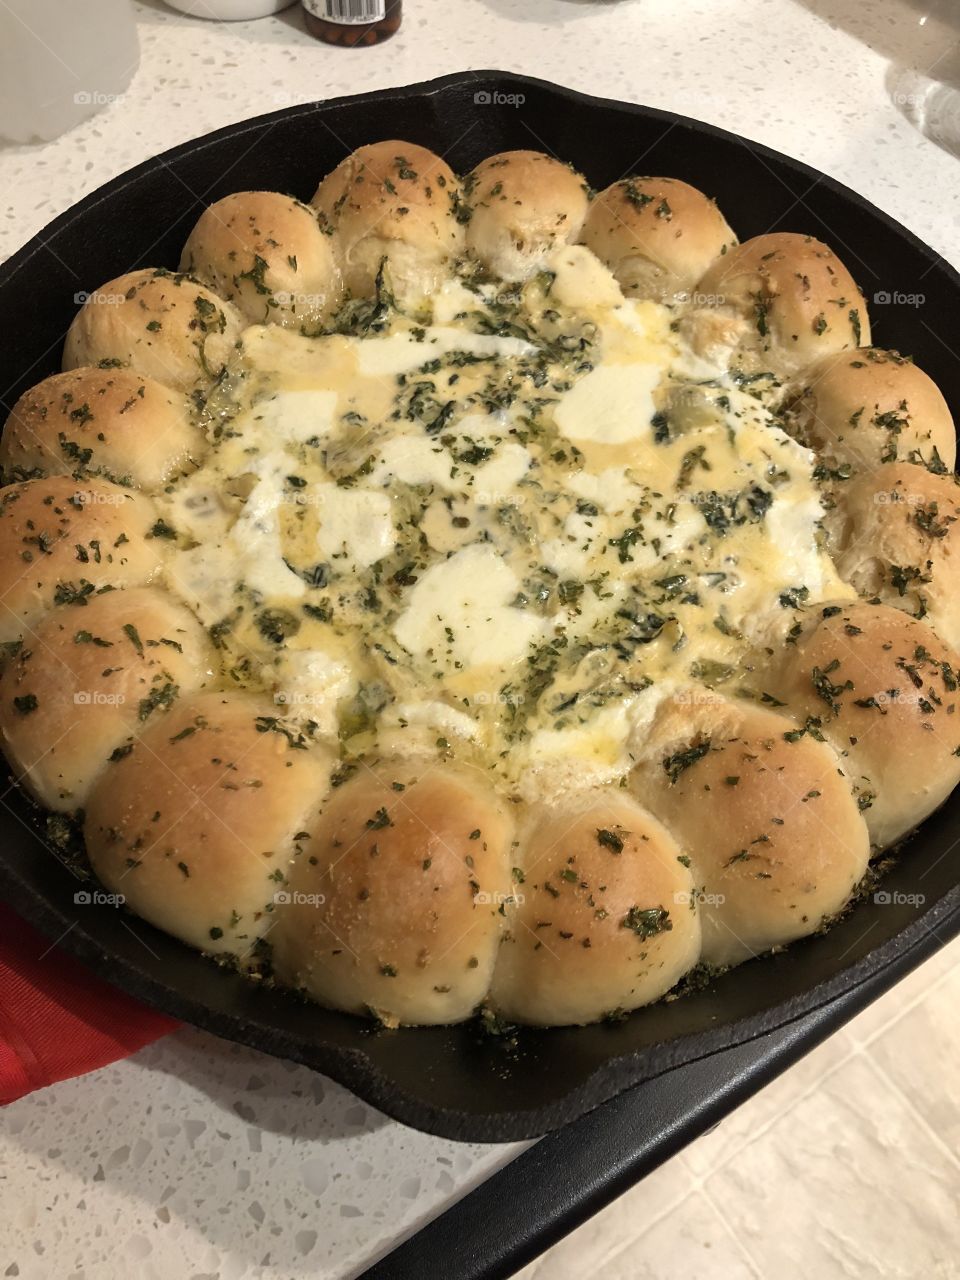 Freshly baked rolls with spinach artichoke dip 